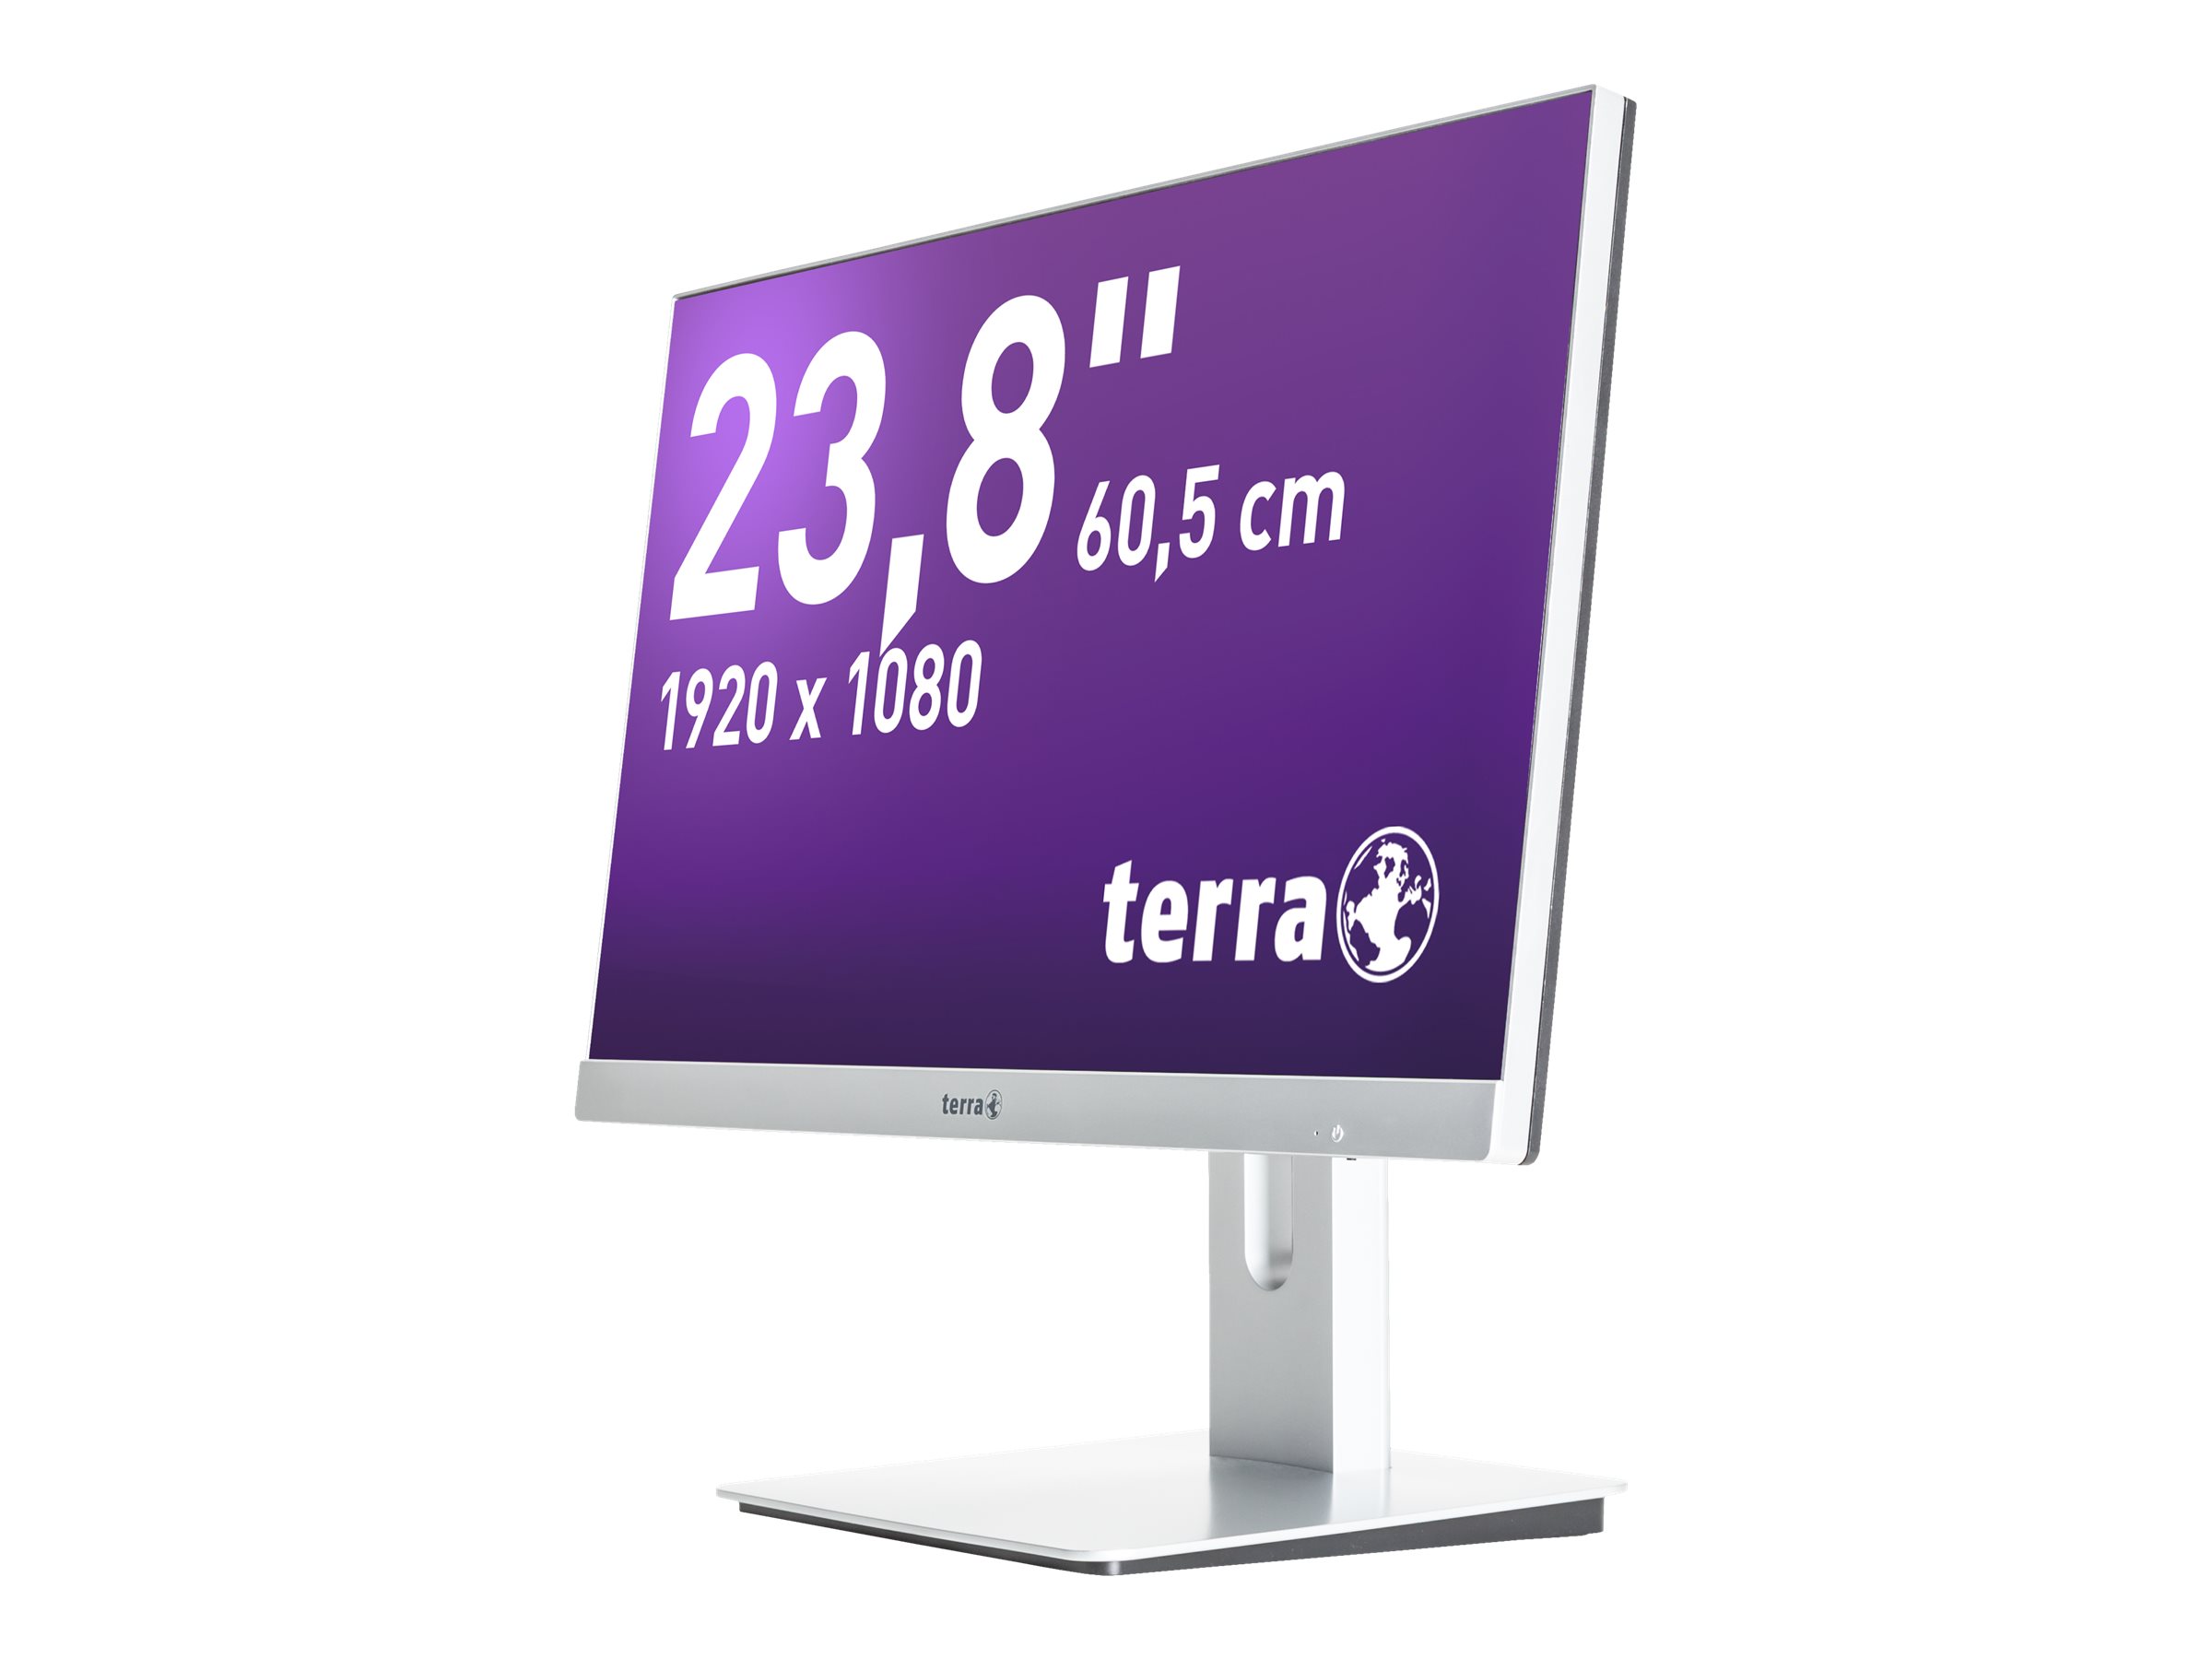 TERRA ALL-IN-ONE-PC 2405HA - GREENLINE - All-in-One (Komplettlösung) - Core i5 9500 / 3 GHz - RAM 8 GB - SSD 500 GB